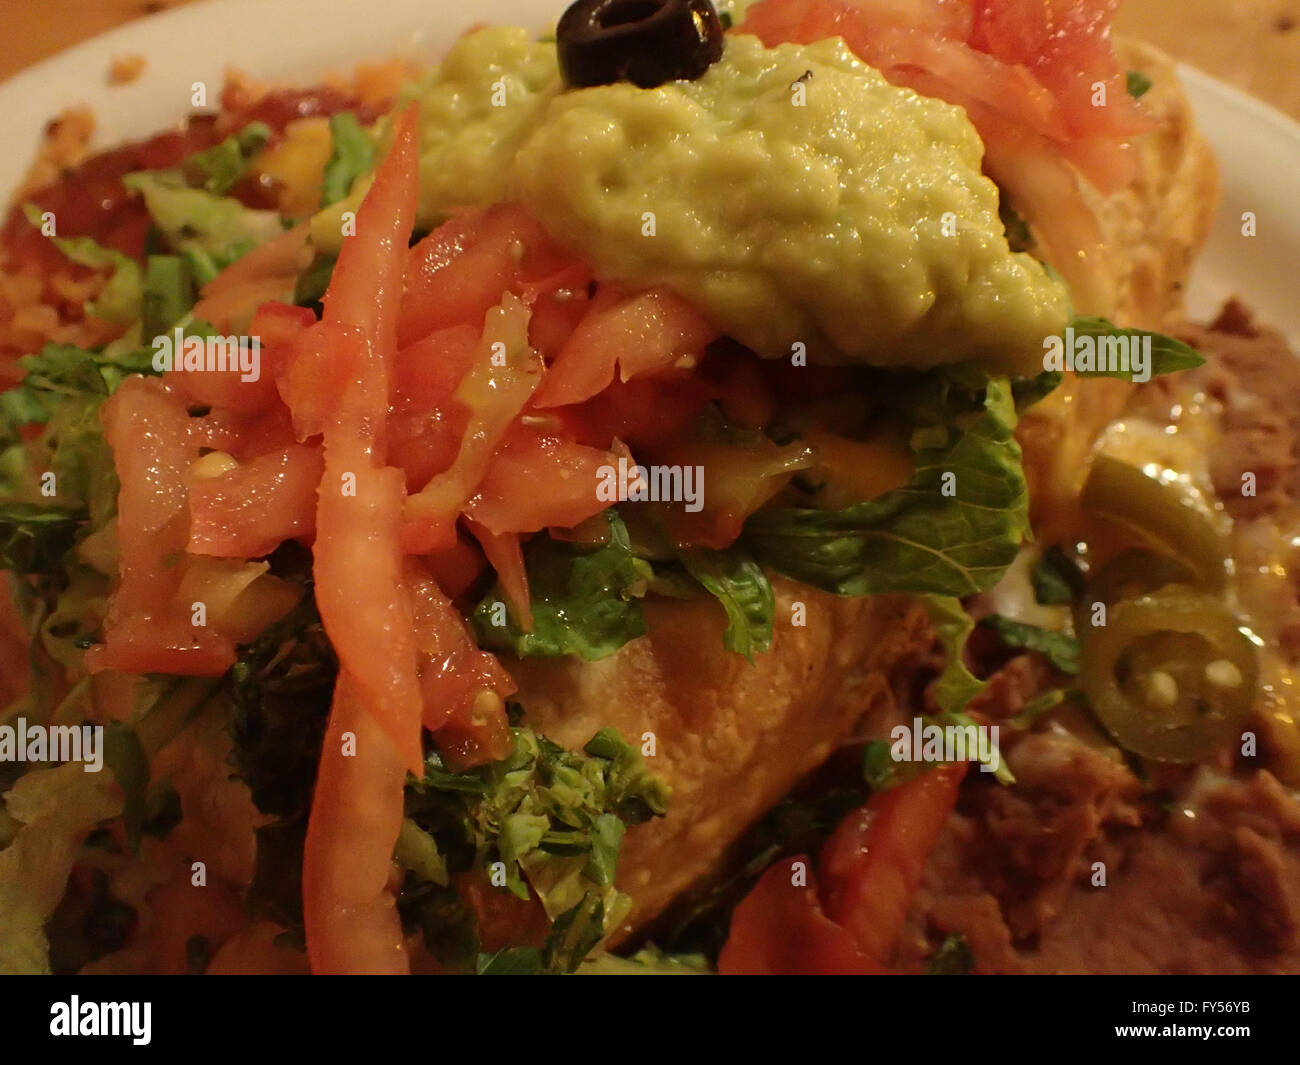 Close-up of Chimichanga topped with salsa, guacamole with spanish rice, beans, on table. Stock Photo